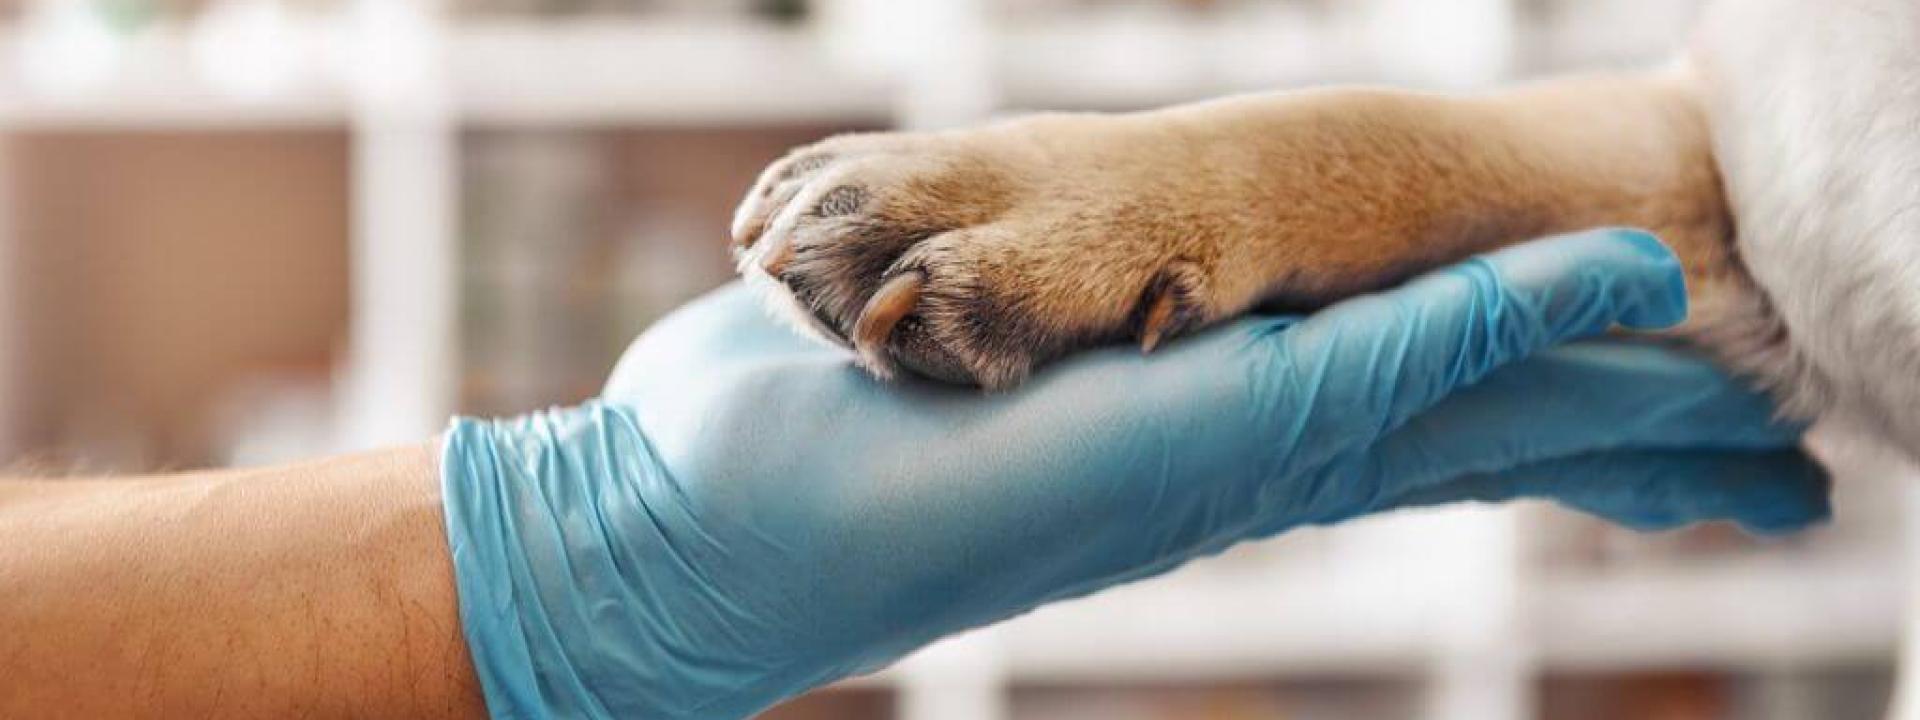 A veterinarian's gloved hand holding a dog's paw